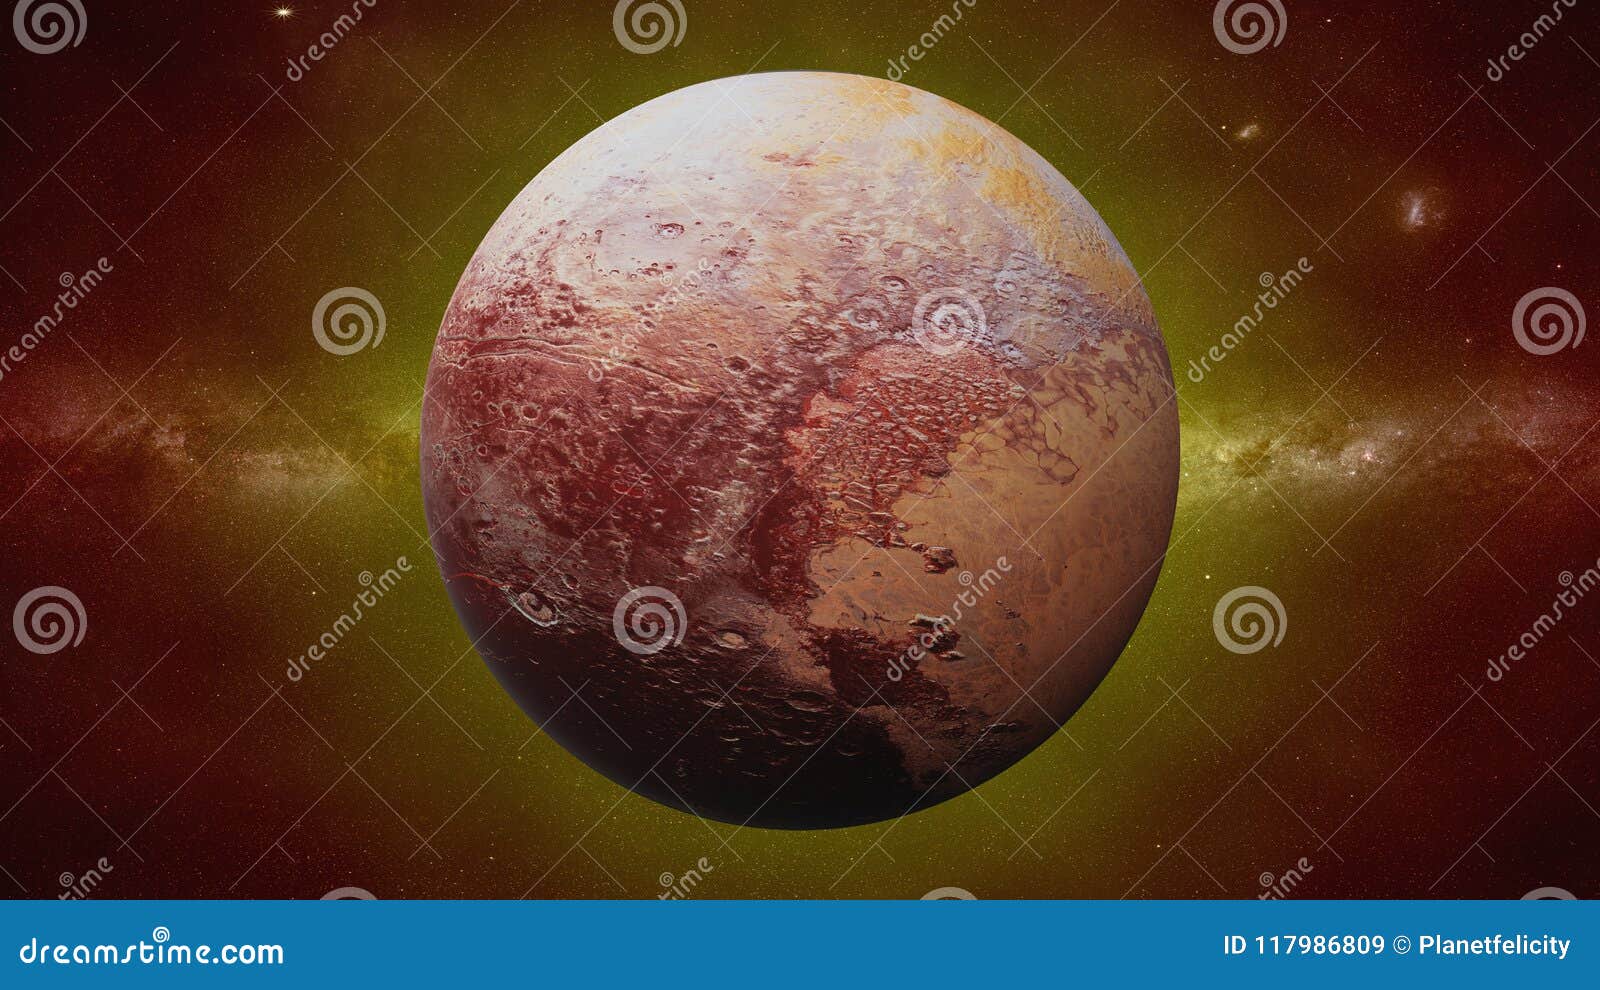 dwarf planet pluto, former planet of the solar system